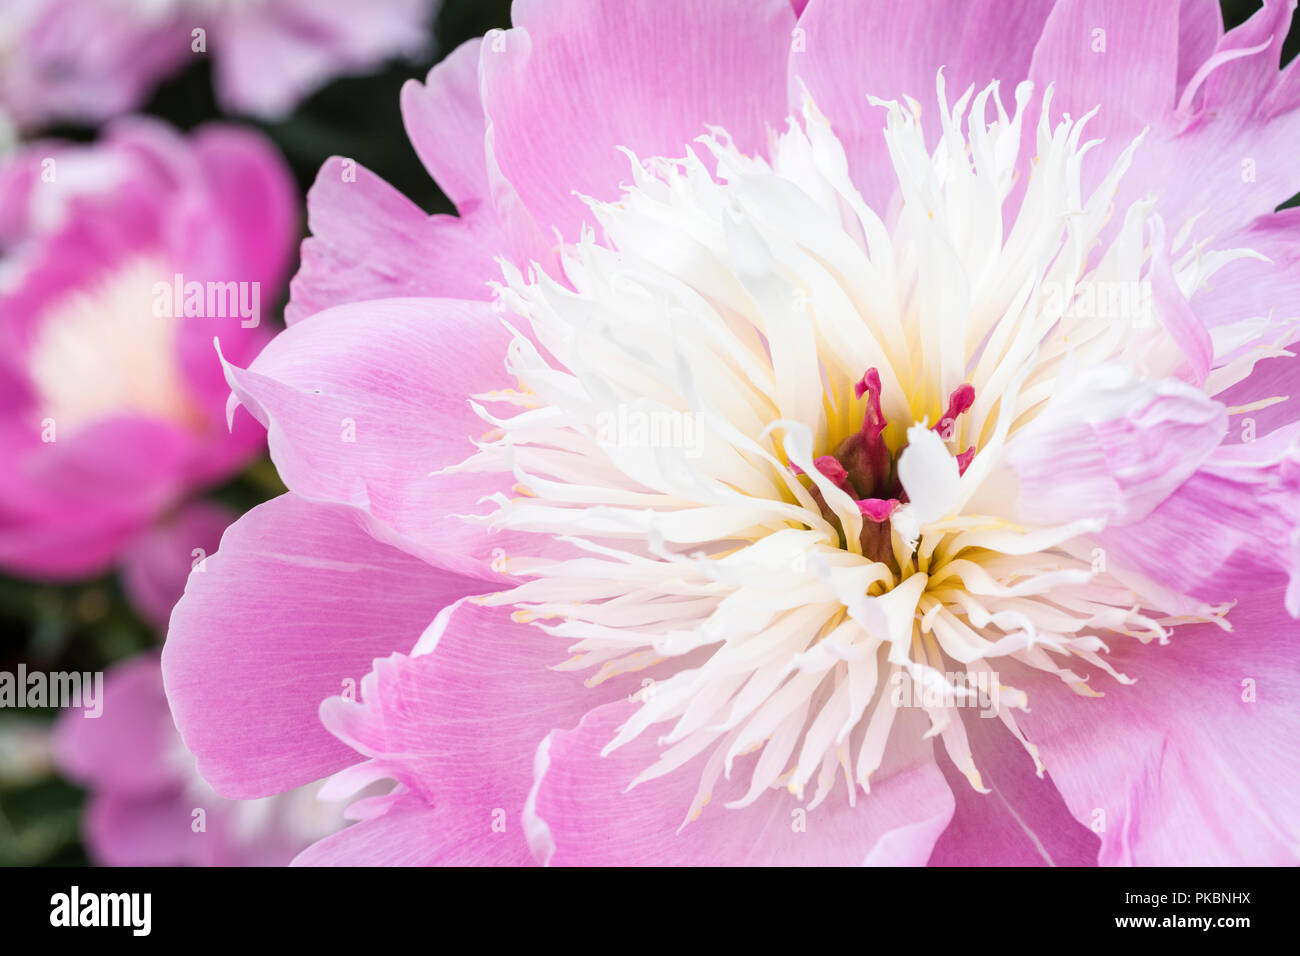 Close-up of Paeonia lactiflora 'Bowl of Beauty', peony 'Bowl of Beauty' flower Stock Photo